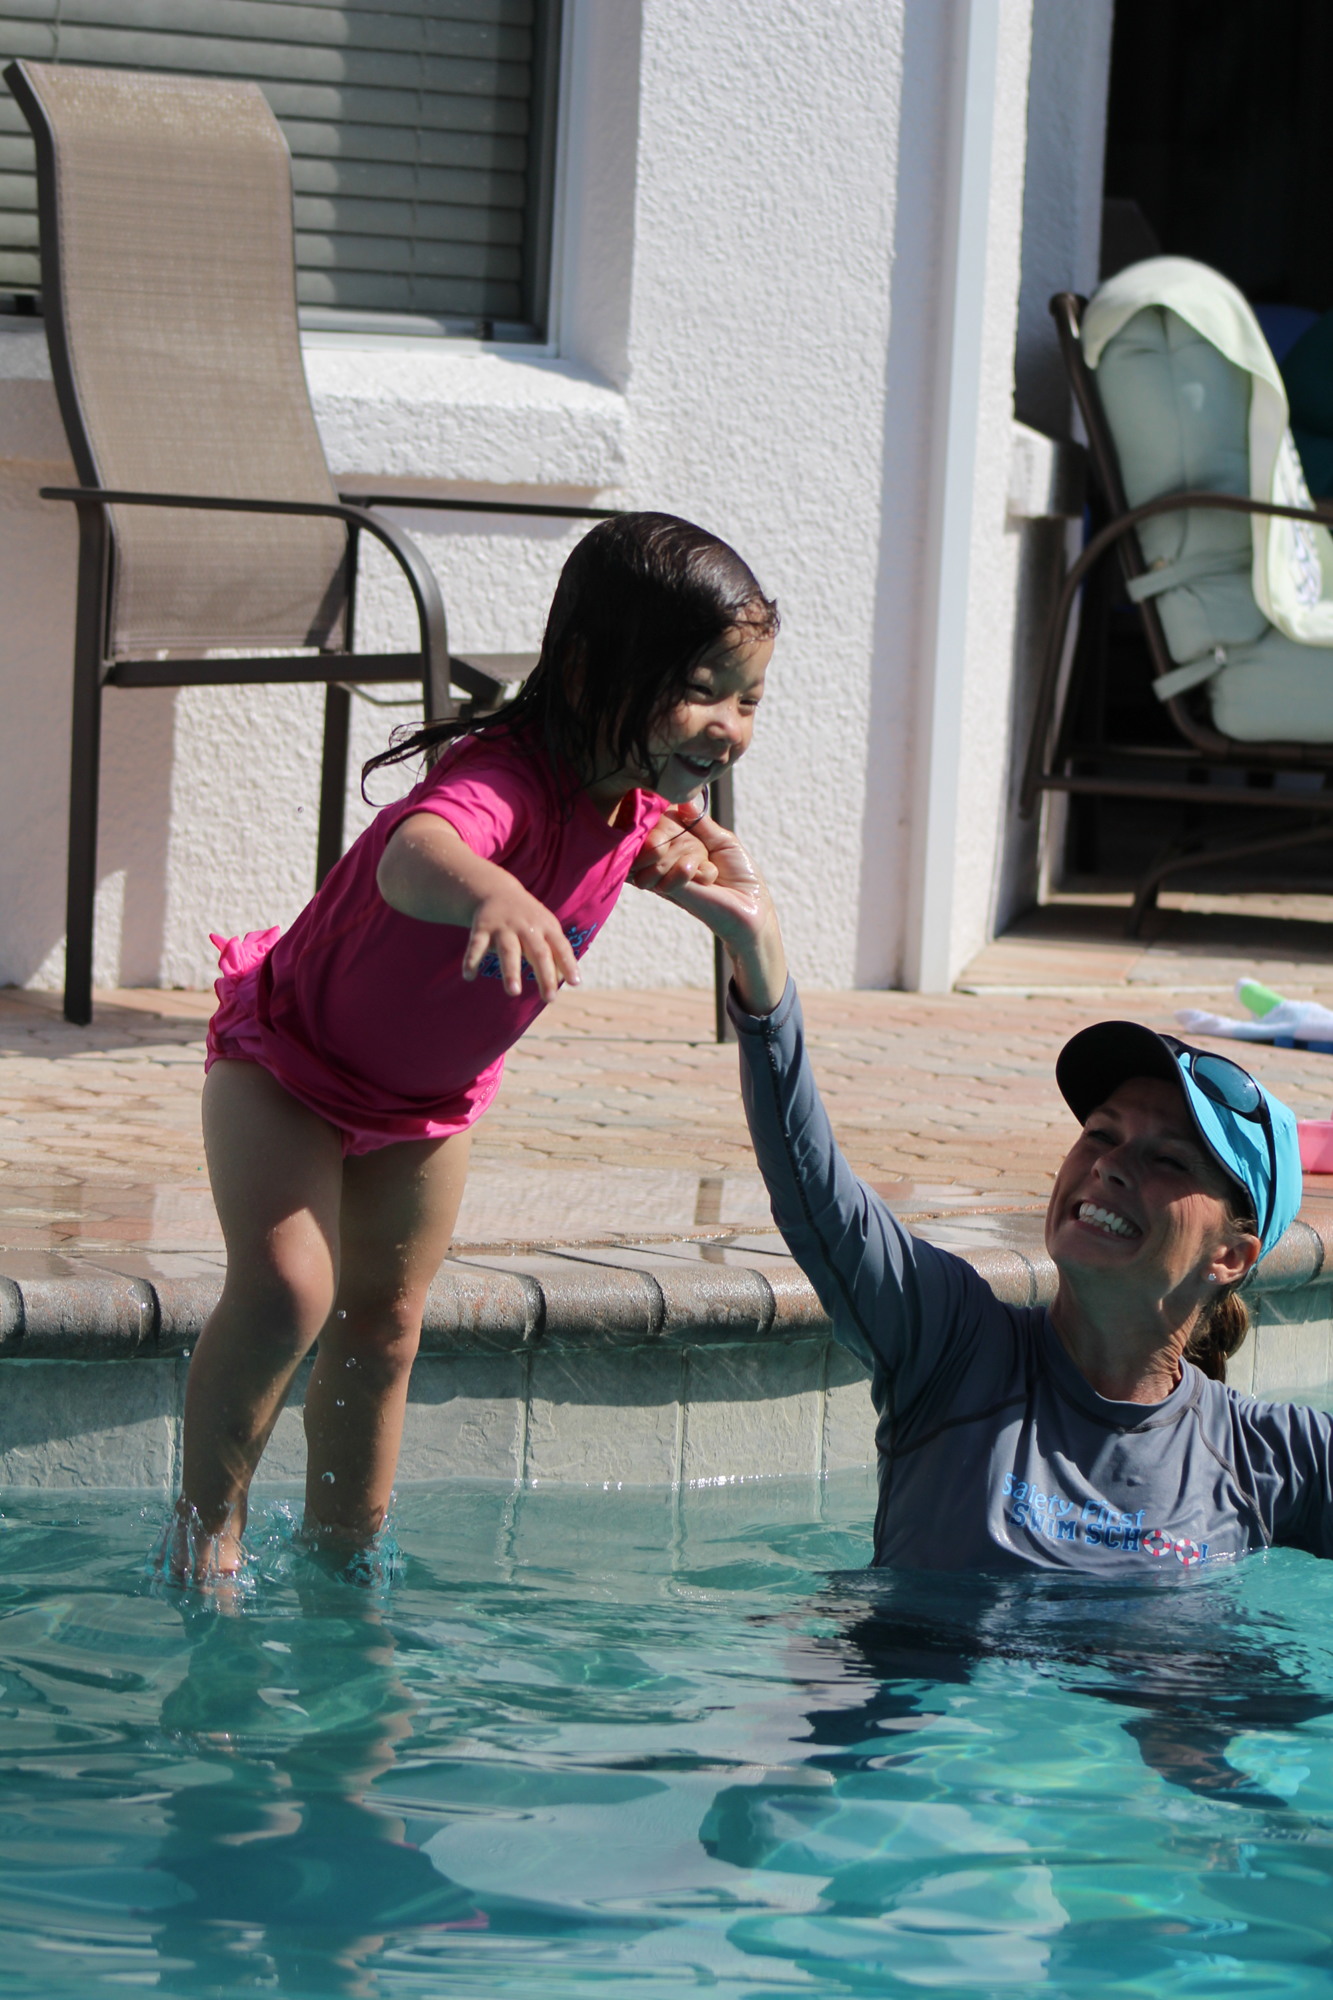 Two-year-old Penelope practices feet first dives with Tanya Jablon's assistance.